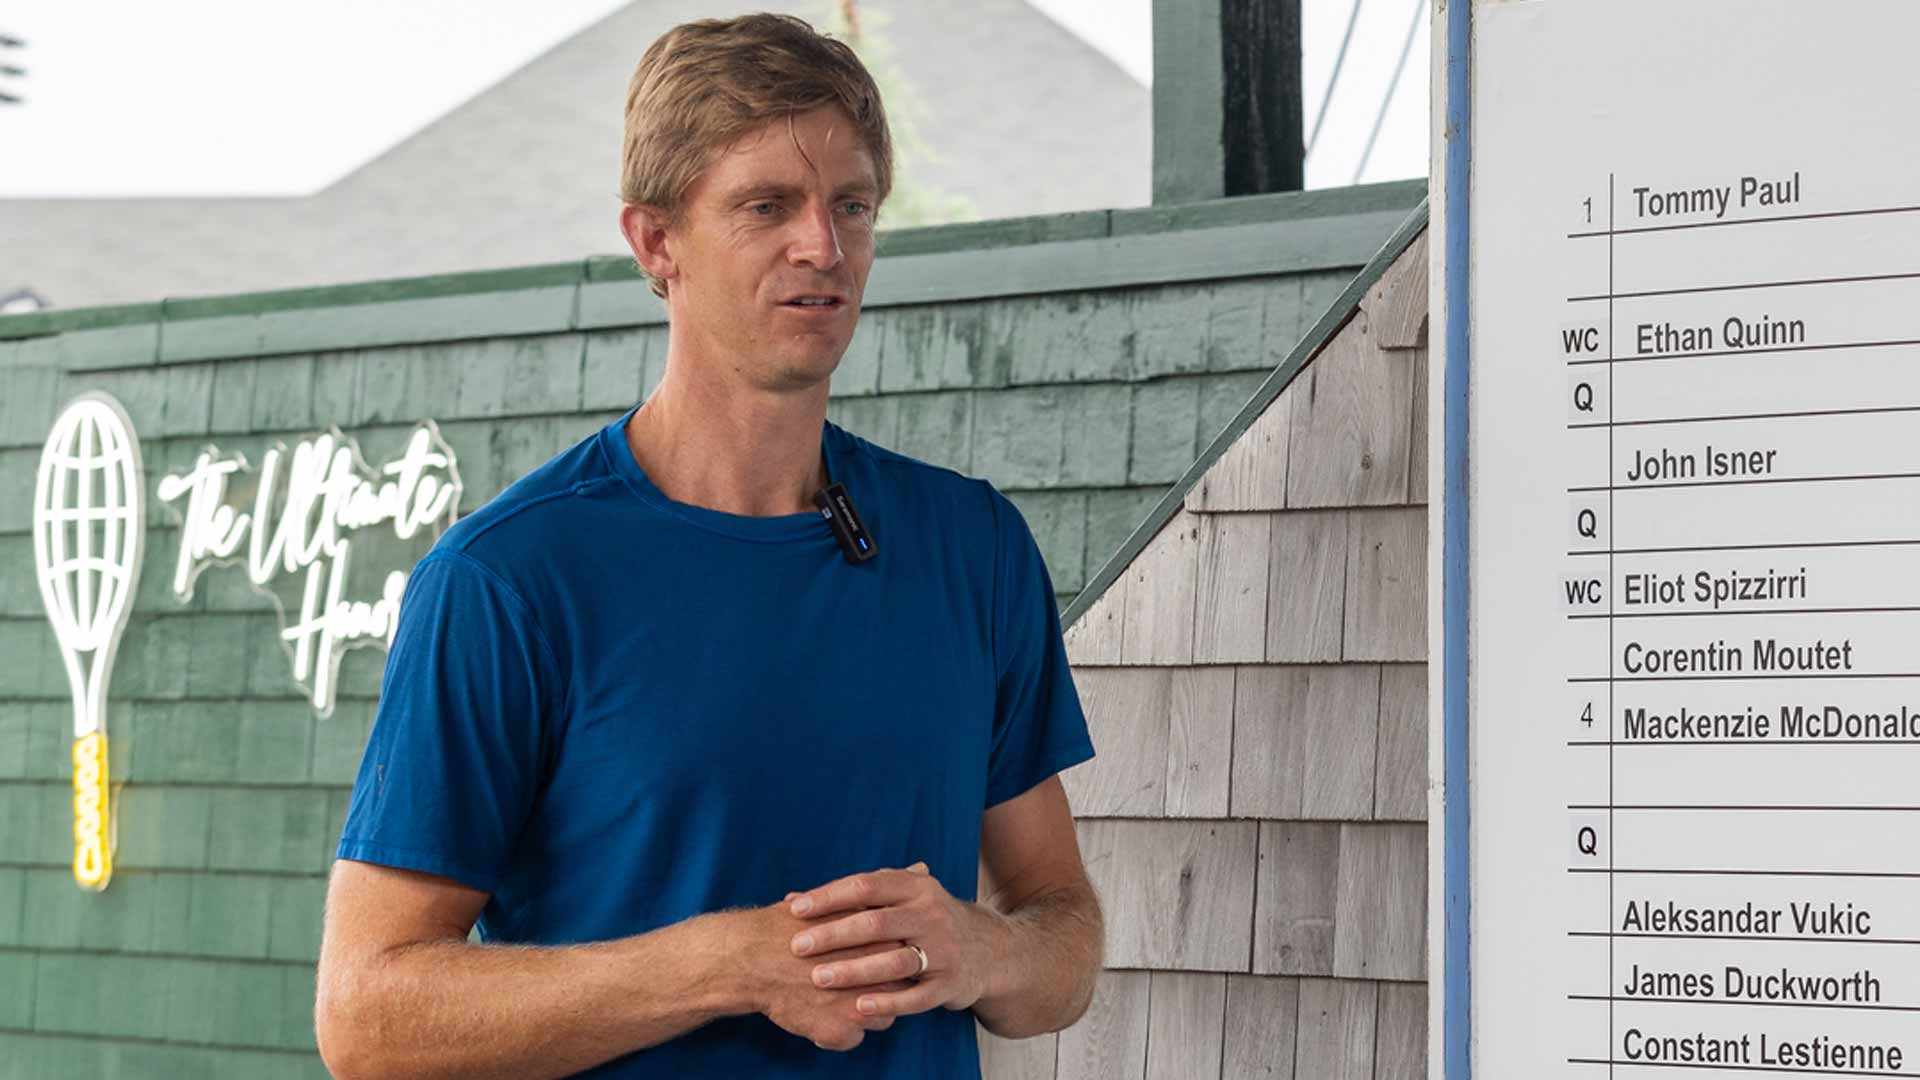 Kevin Anderson is set to compete this week in Newport, where he won the title in 2021.